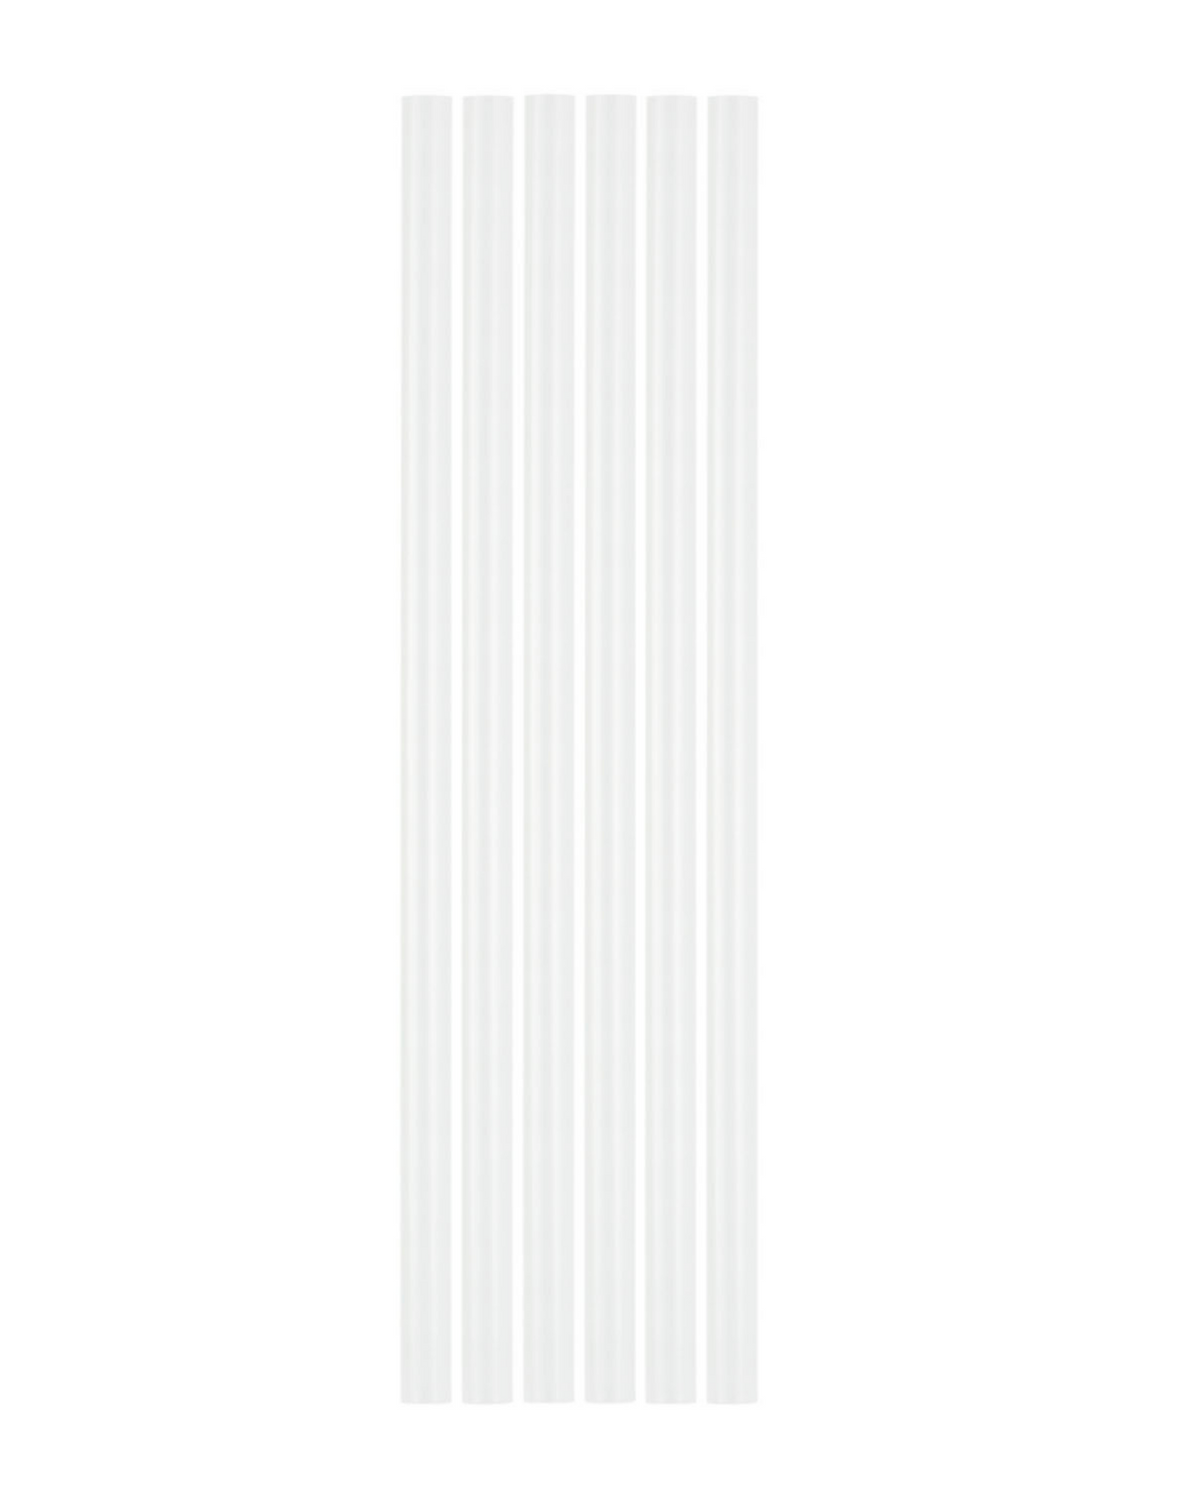 Tervis Straws - Frosted item